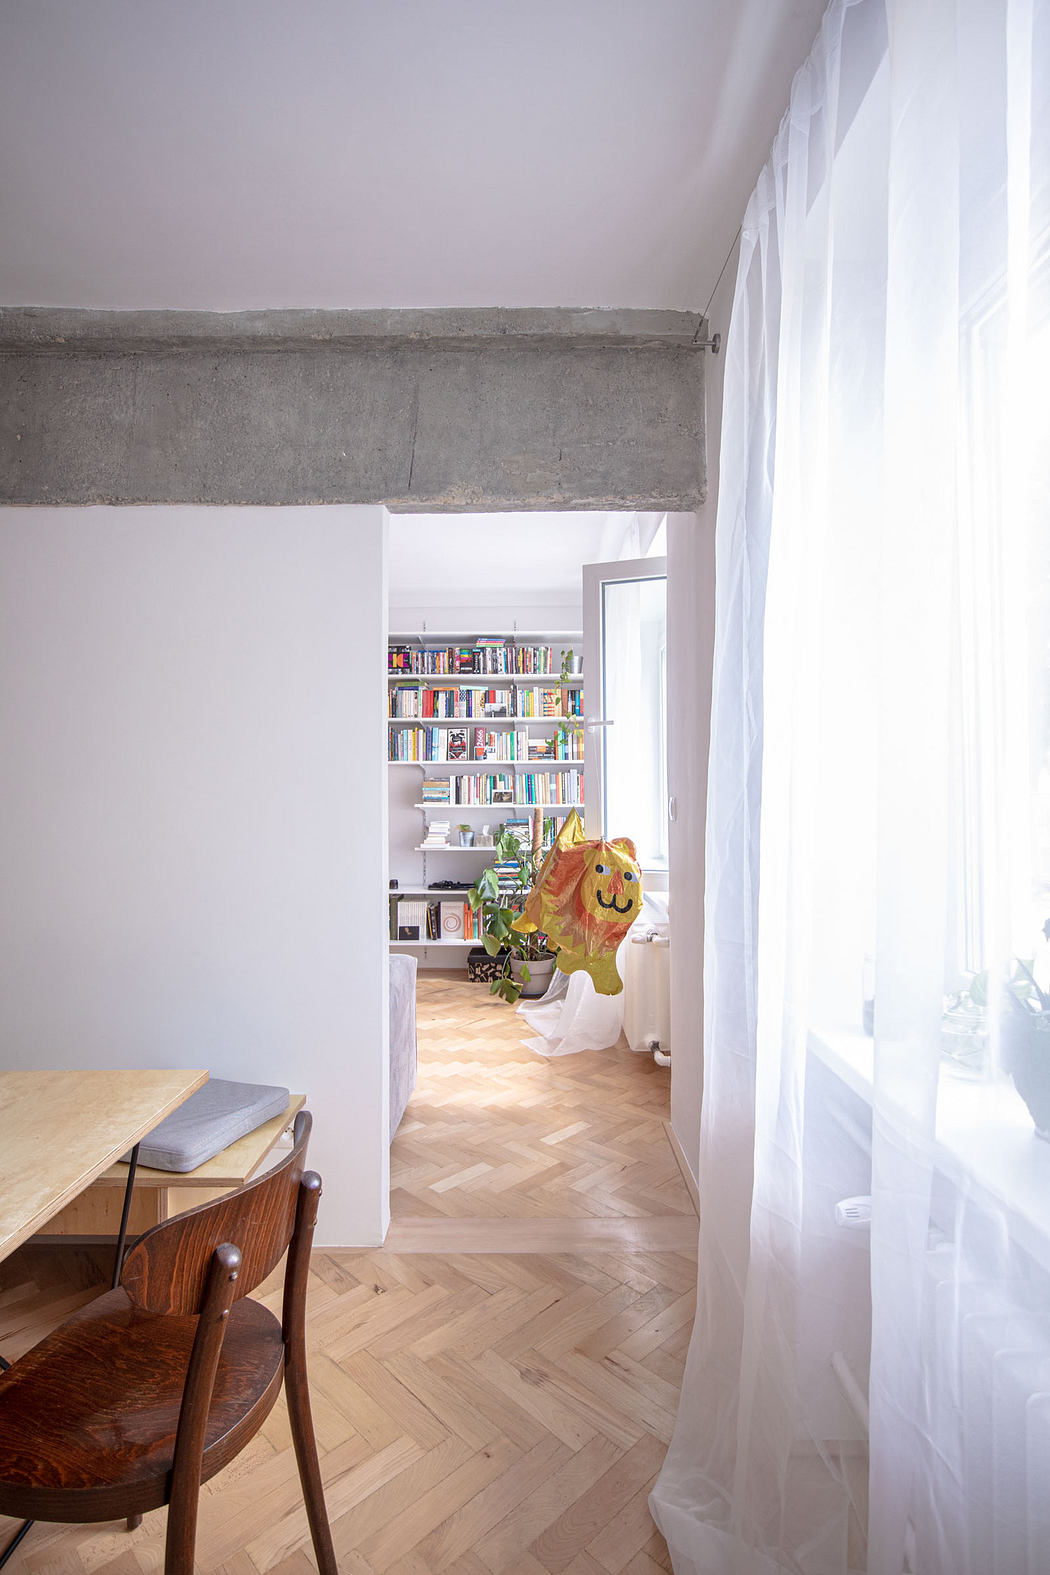 Bright, airy room with sheer curtains, wooden floors, and a built-in book